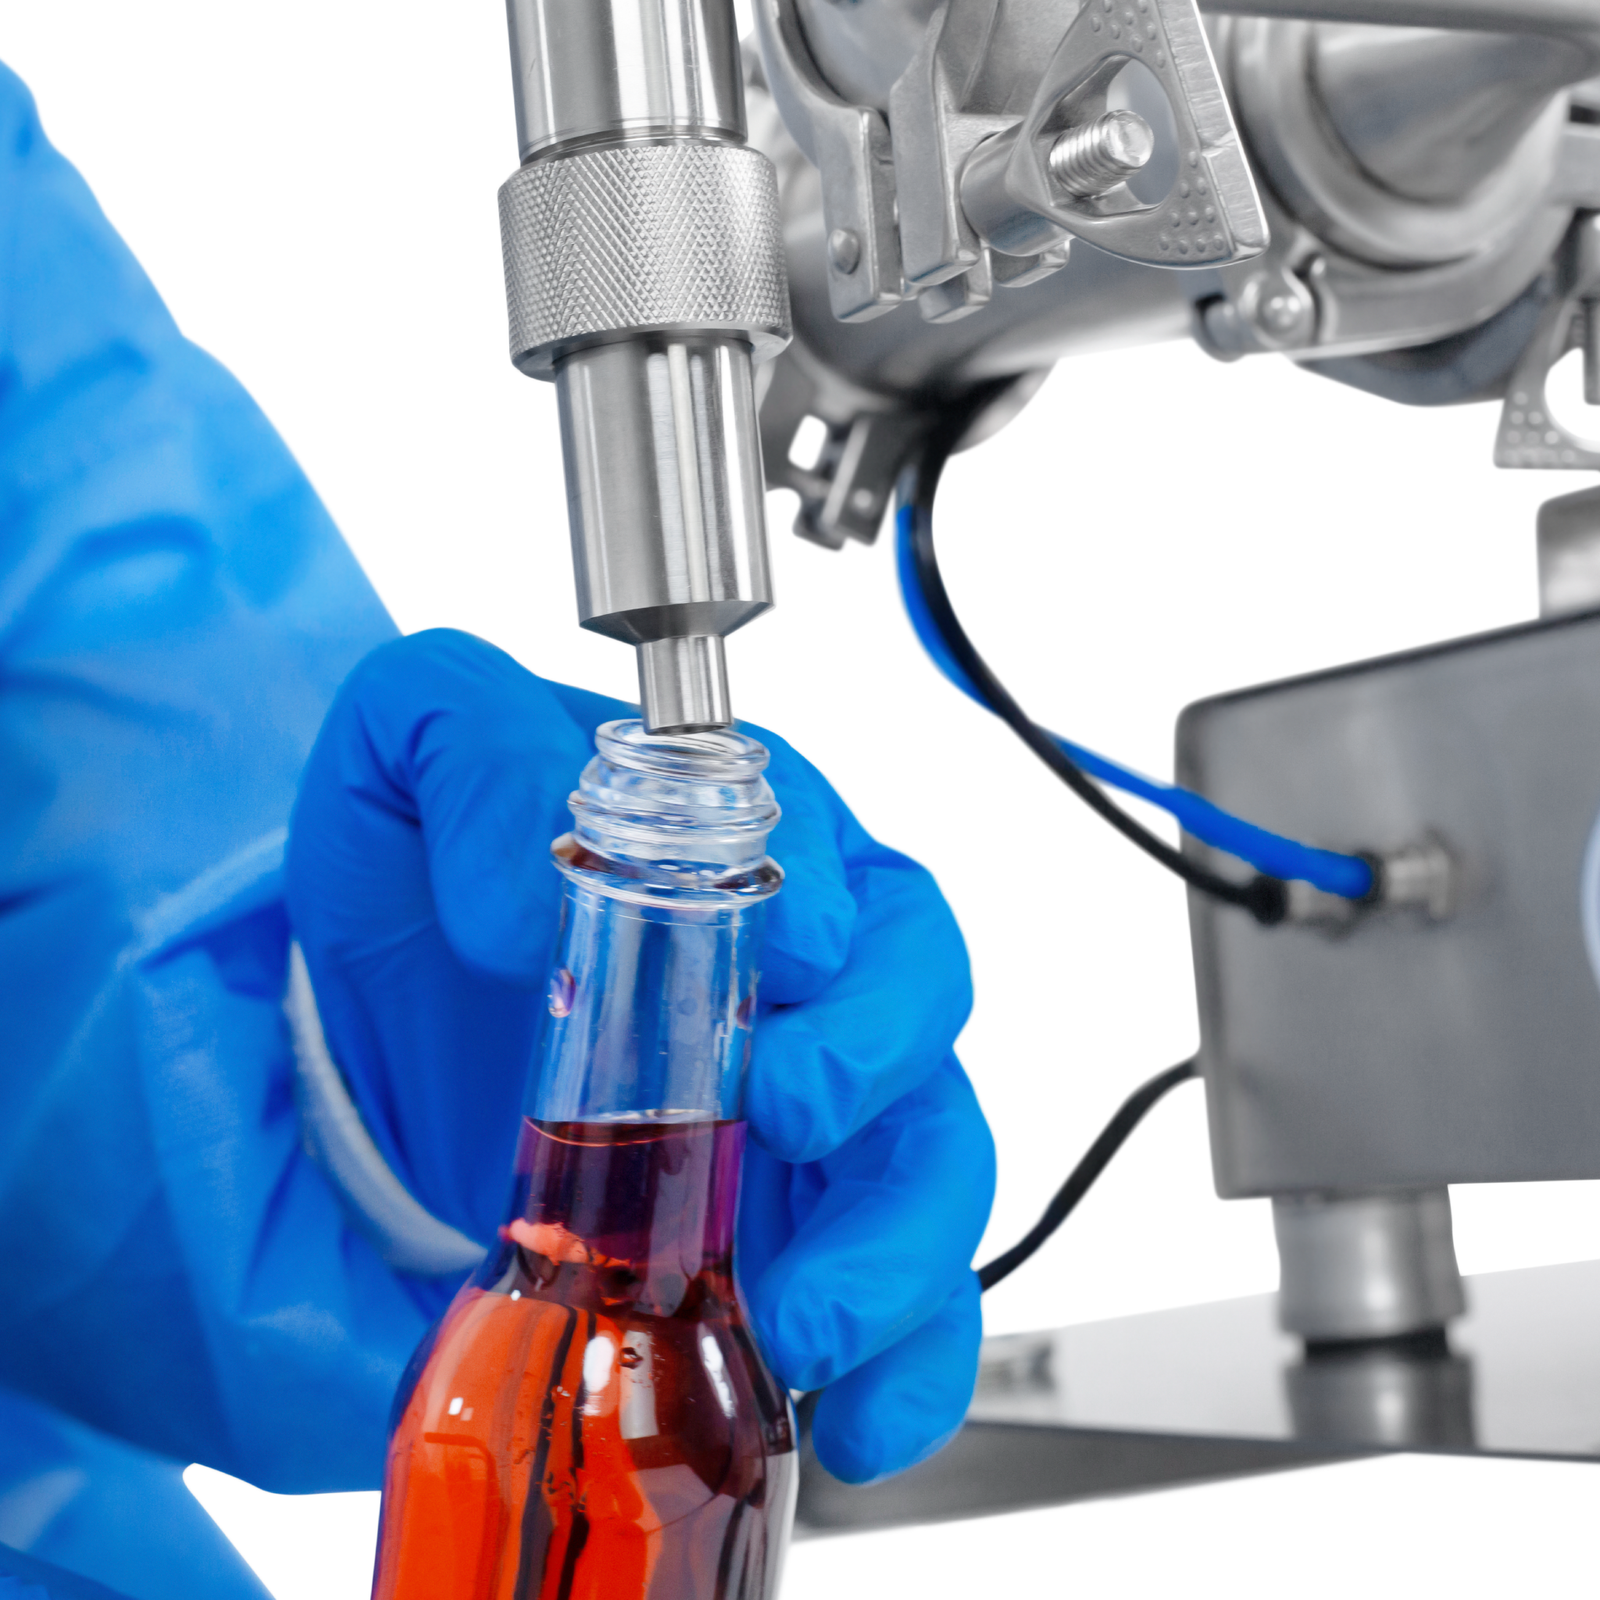 Worker wearing nitrile safety gloves operating the JORES TECHNOLOGIES® Low Viscosity Piston Filler. The person is positioning a 250ml bottle below the tip of the non-drip nozzle to be filled with accuracy by the liquid filling machine.